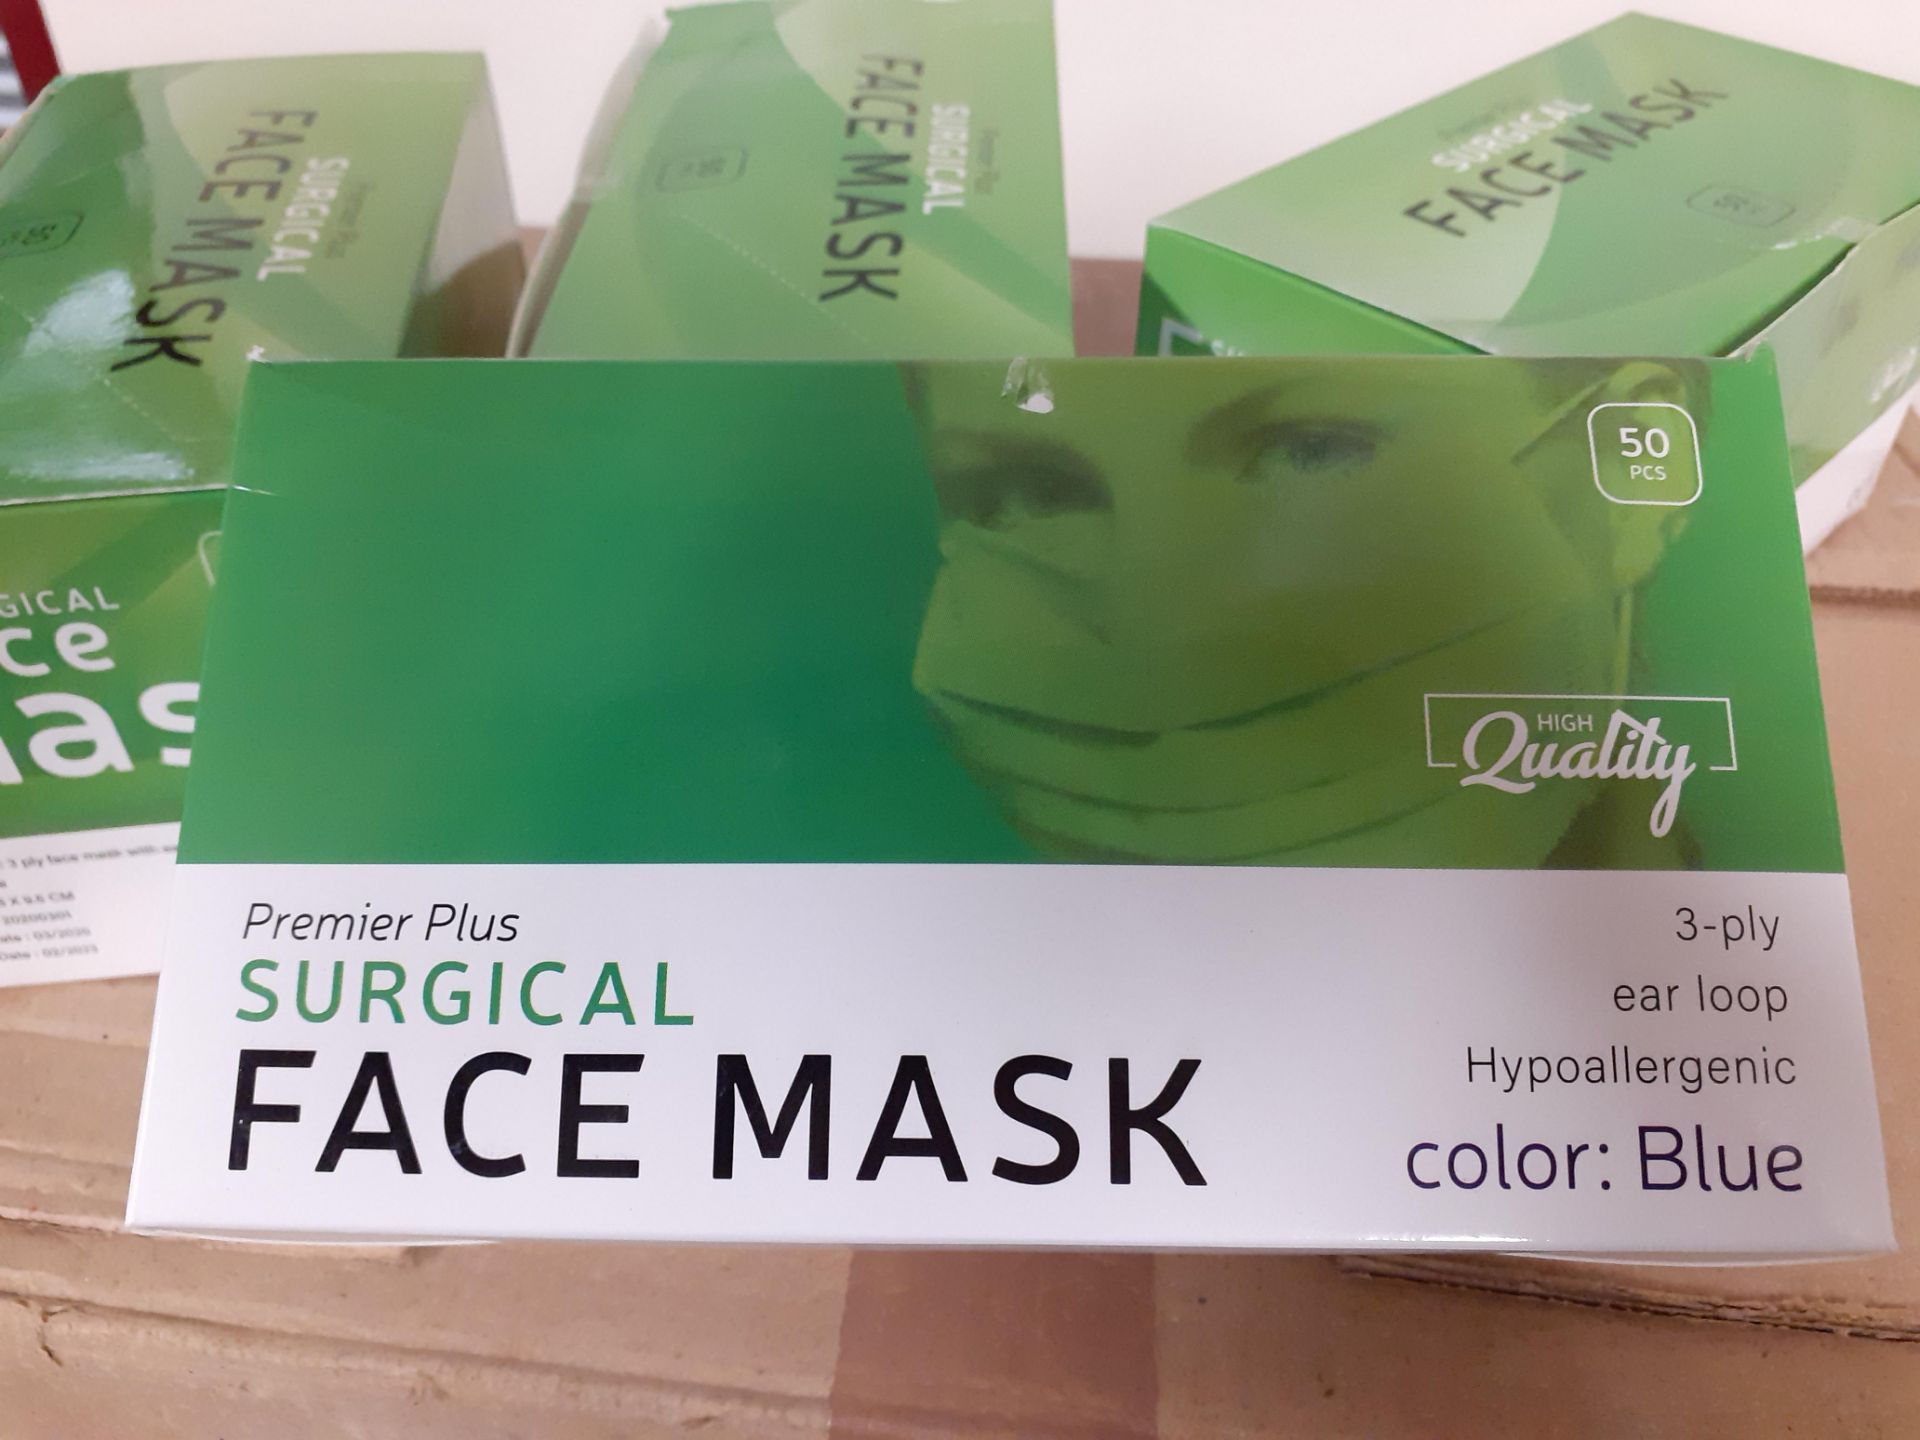 SURGICAL FACE MASKS - YOU'RE ONLY BIDDING FOR ONE CARTON OF 40 BOXES, EACH BOX = 50 MASKS 2000 TOTAL - Image 4 of 6